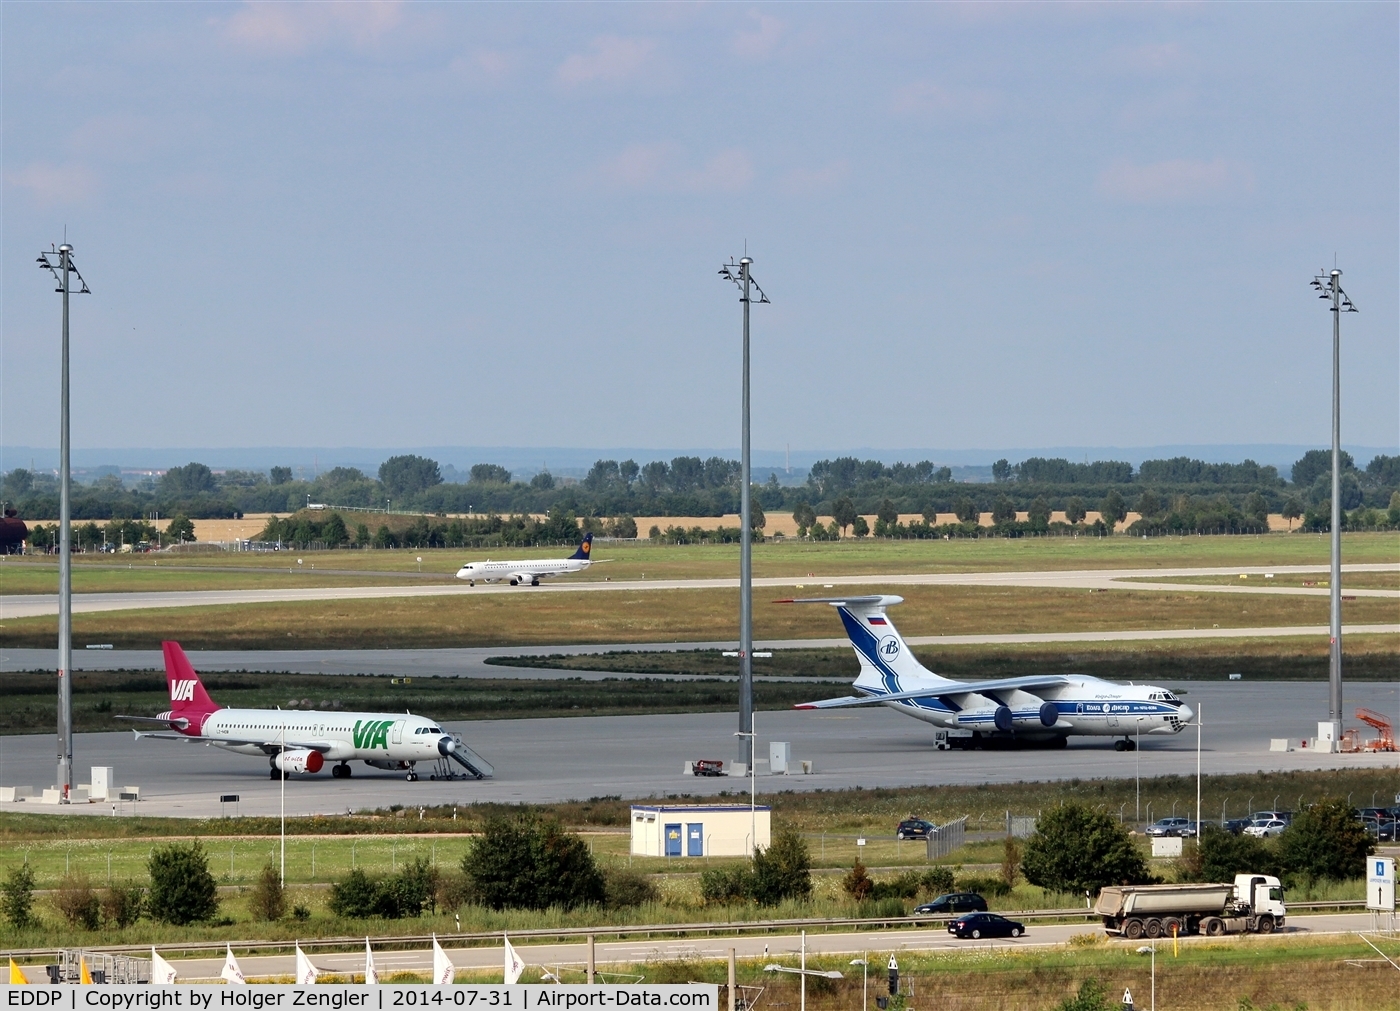 Leipzig/Halle Airport, Leipzig/Halle Germany (EDDP) - View over apron 3 to inbound traffic on rwy 26R....